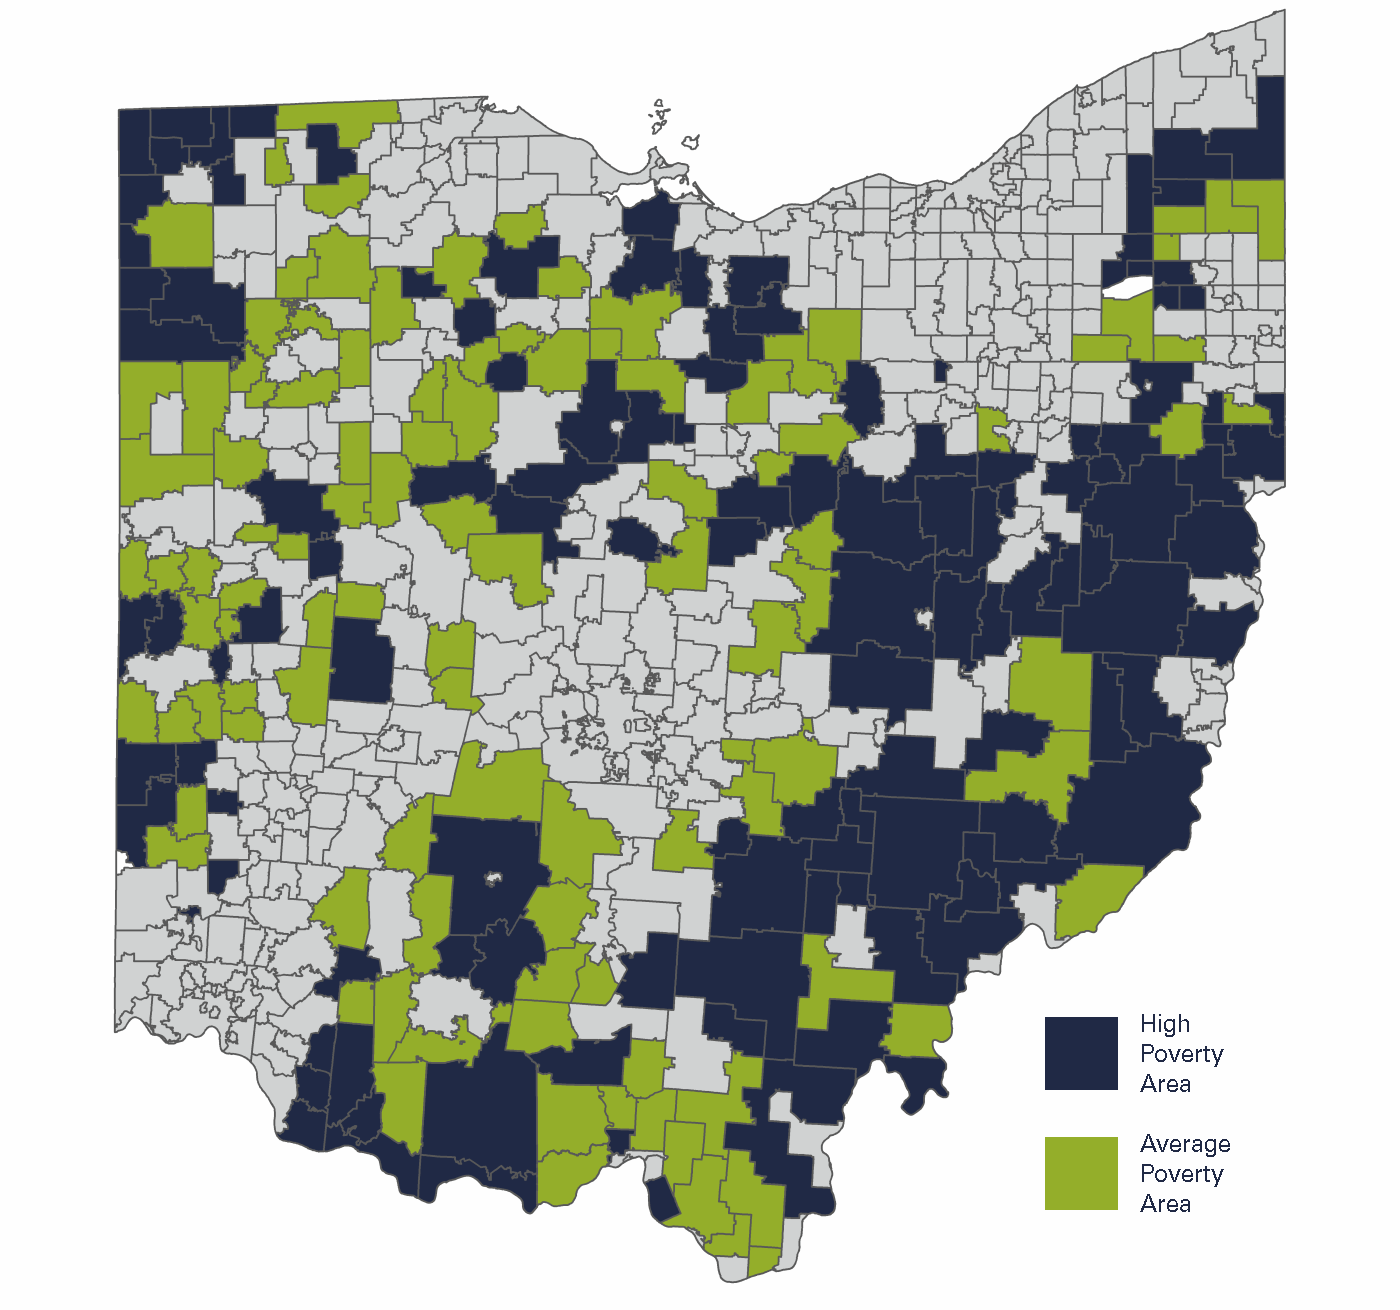 This is a map of Ohio's Rural School Districts. It shows areas with high poverty colored in blue and areas with average poverty colored in green.